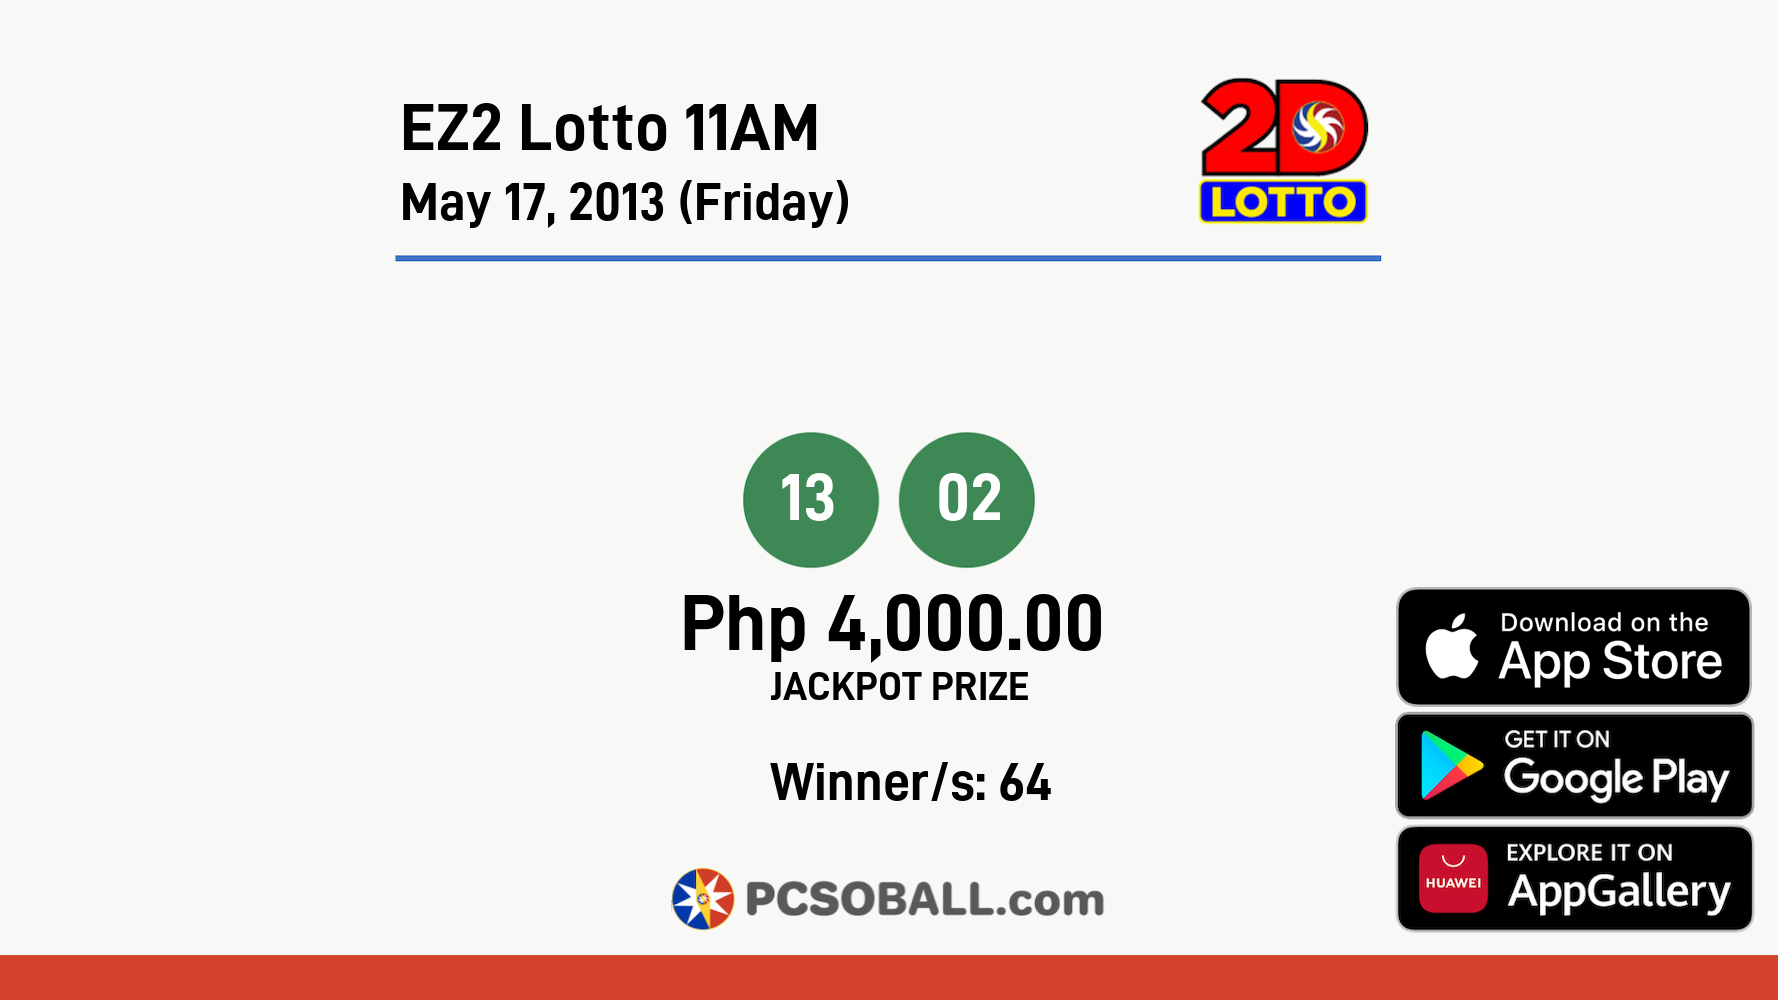 EZ2 Lotto 11AM May 17, 2013 (Friday) Result